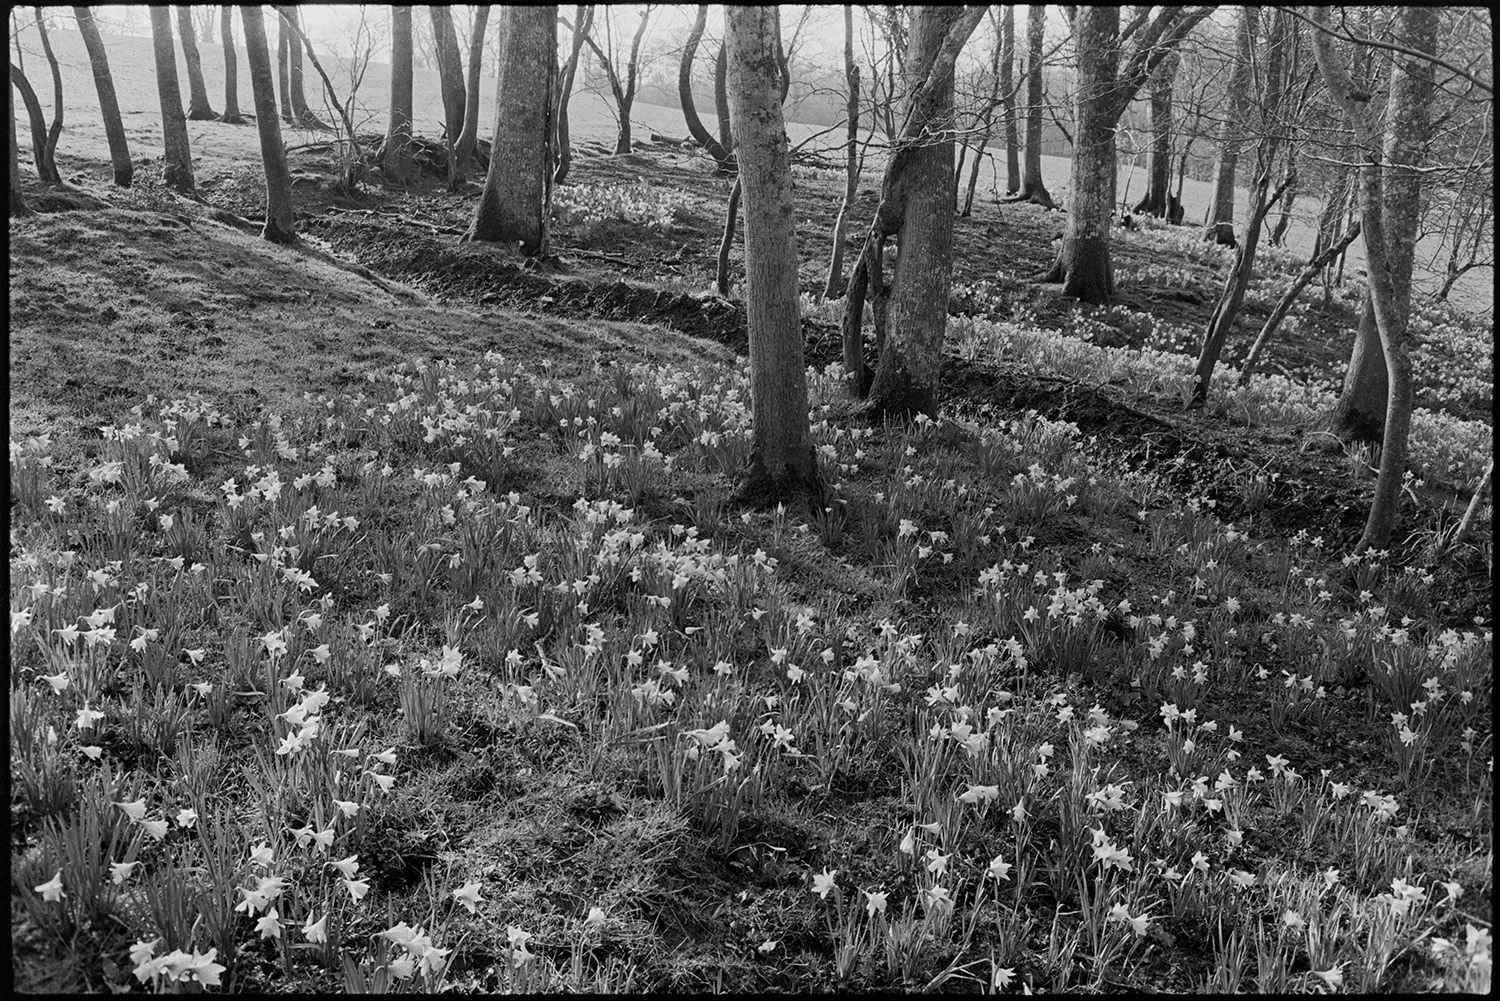 Trees with daffodils. 
[Daffodils in bloom in a wooded area by a field at Lower Langham, Dolton.]